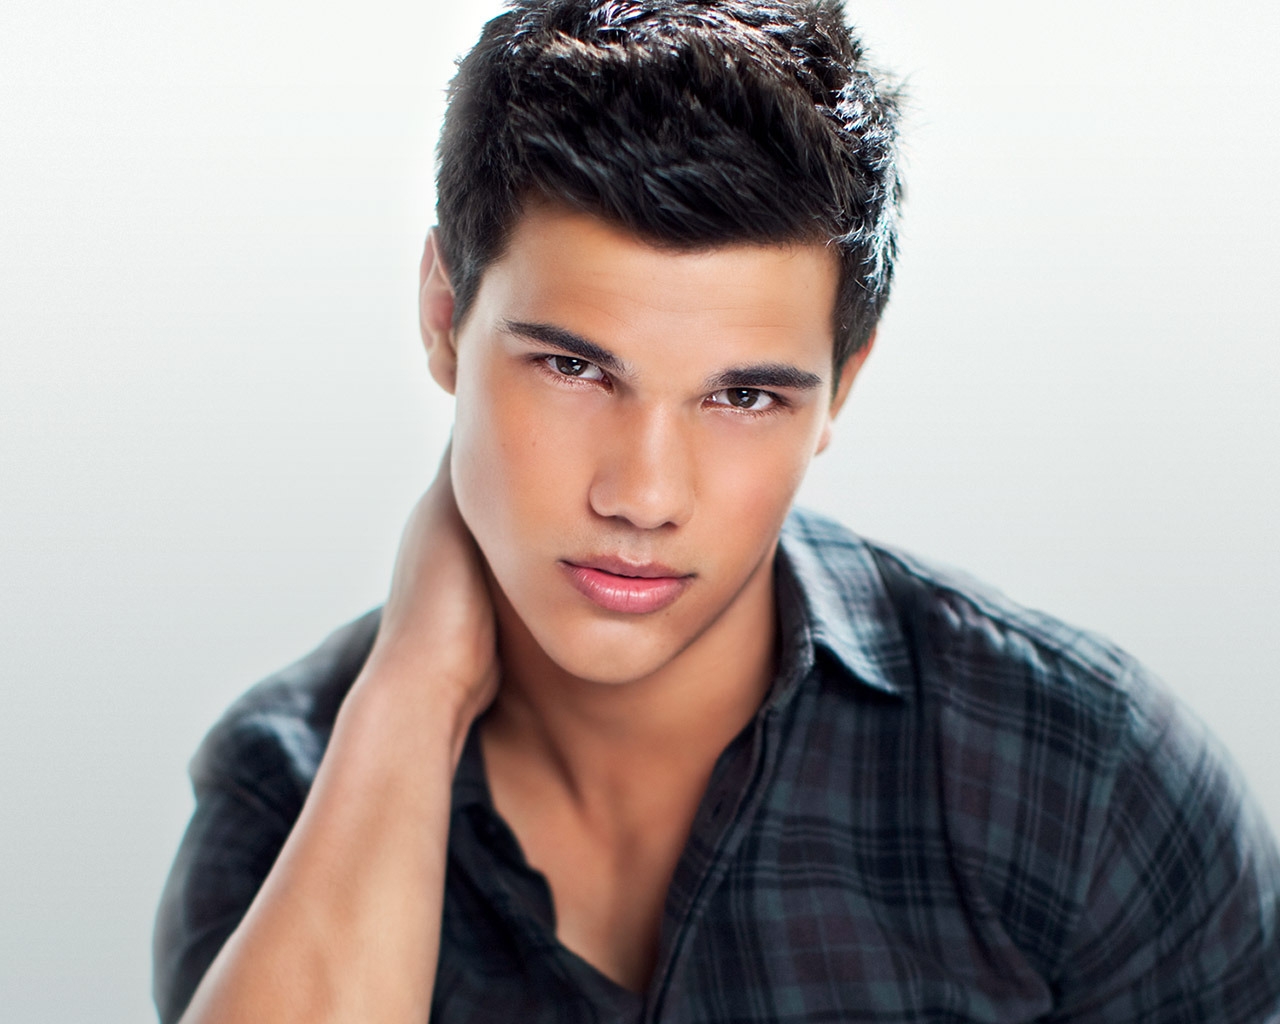 Taylor Lautner Actor for 1280 x 1024 resolution